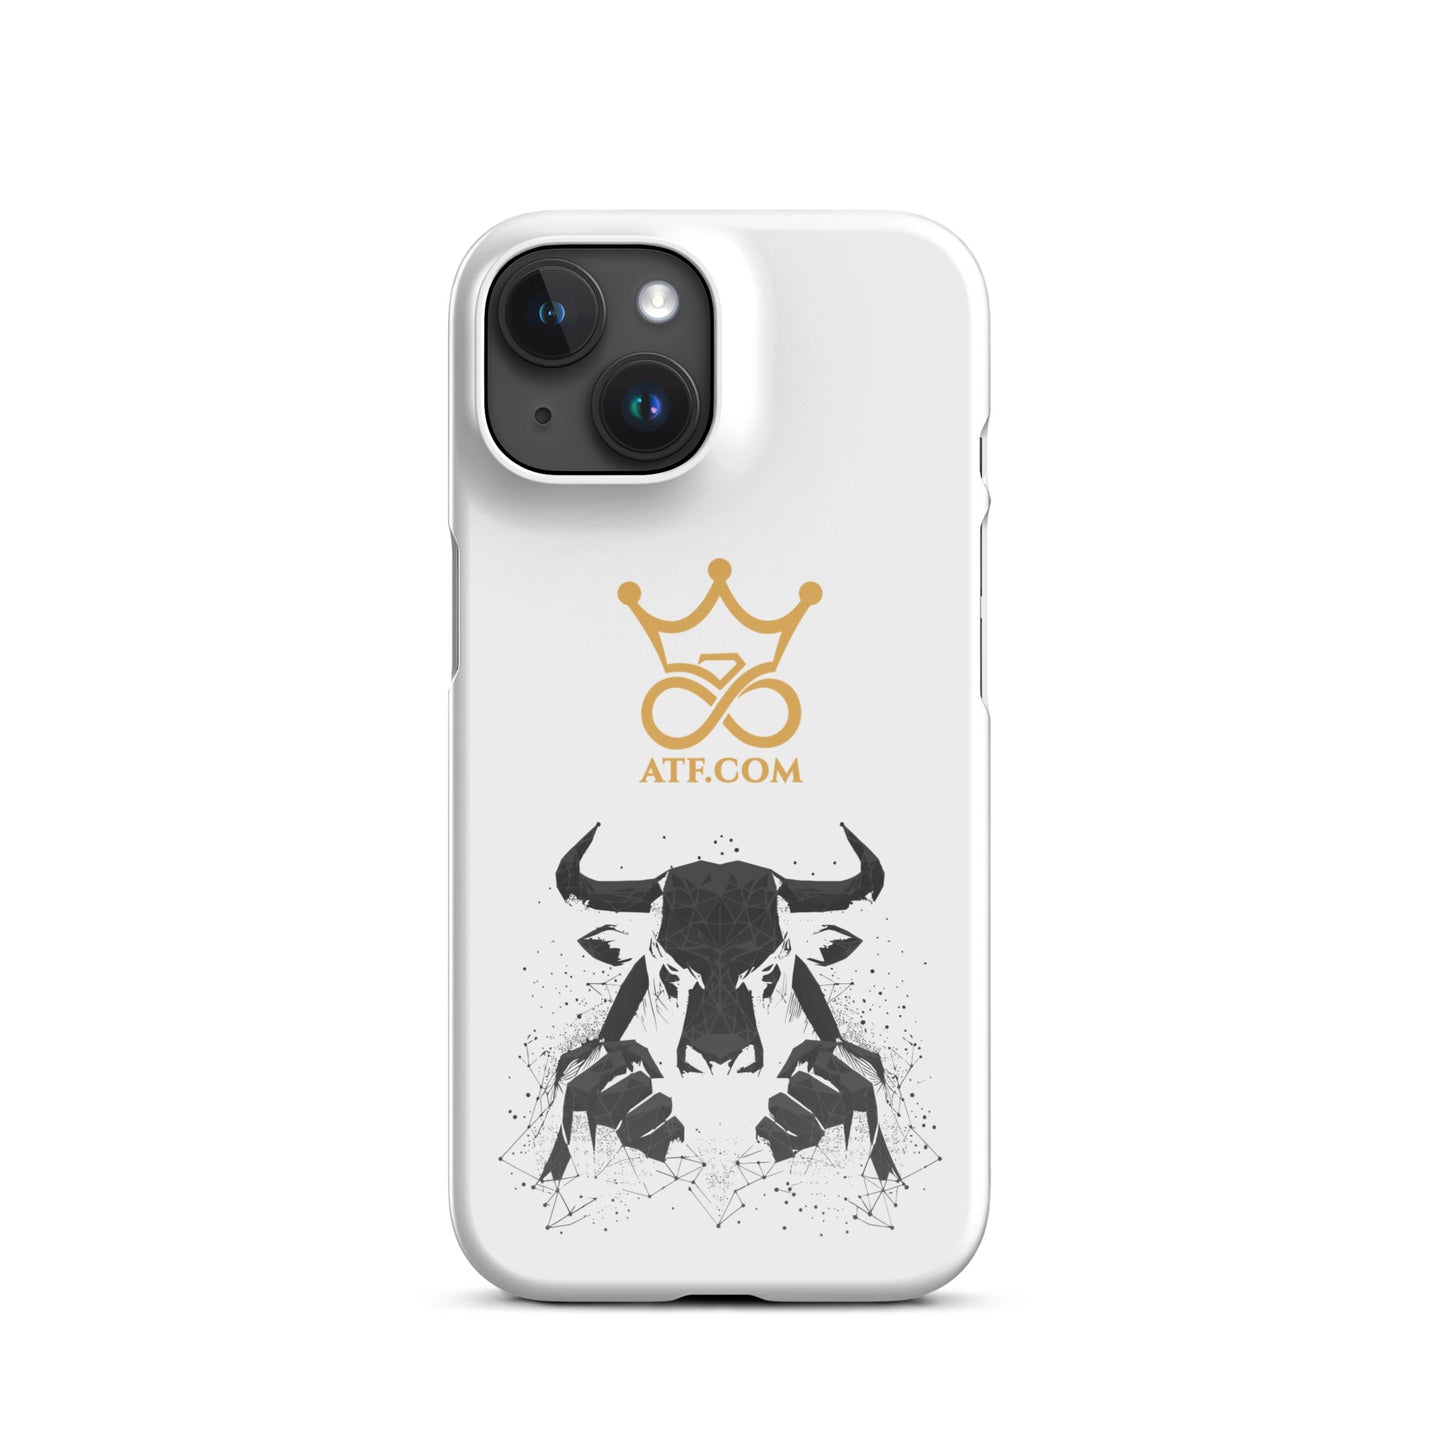 Snap case for iPhone (SKU 0094)